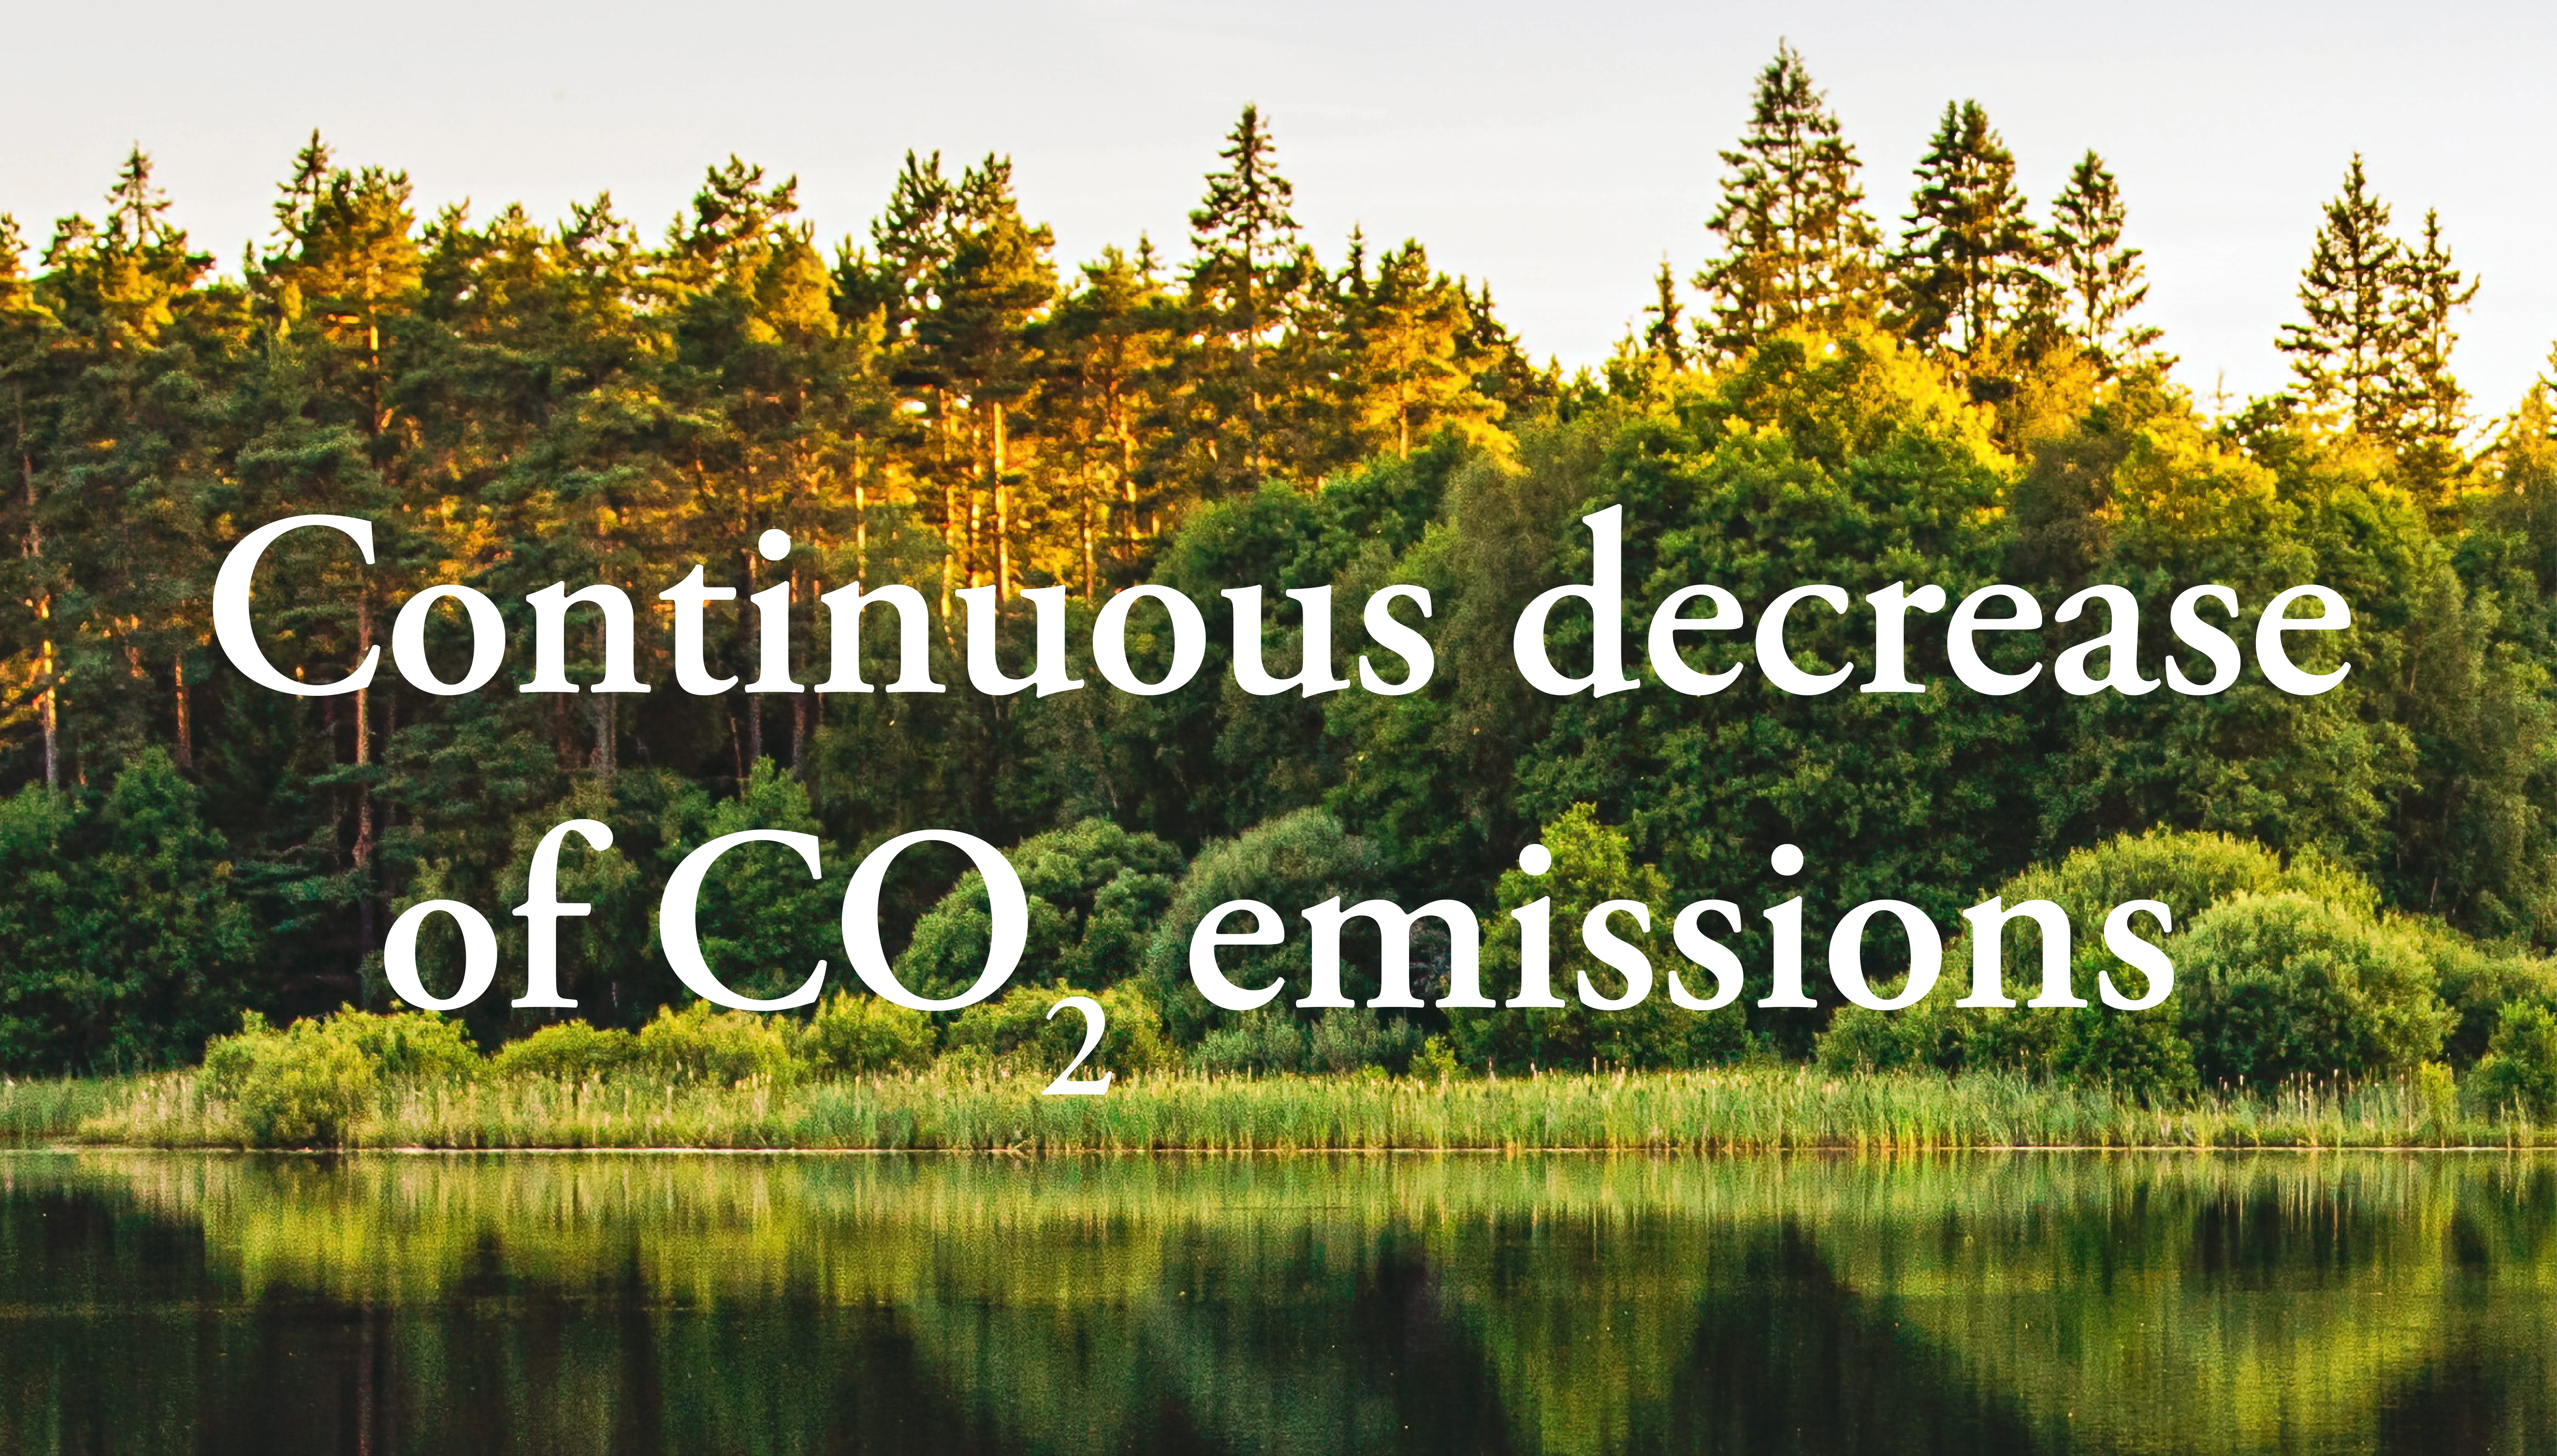 lessebo paper low co2 emissions 22 kg